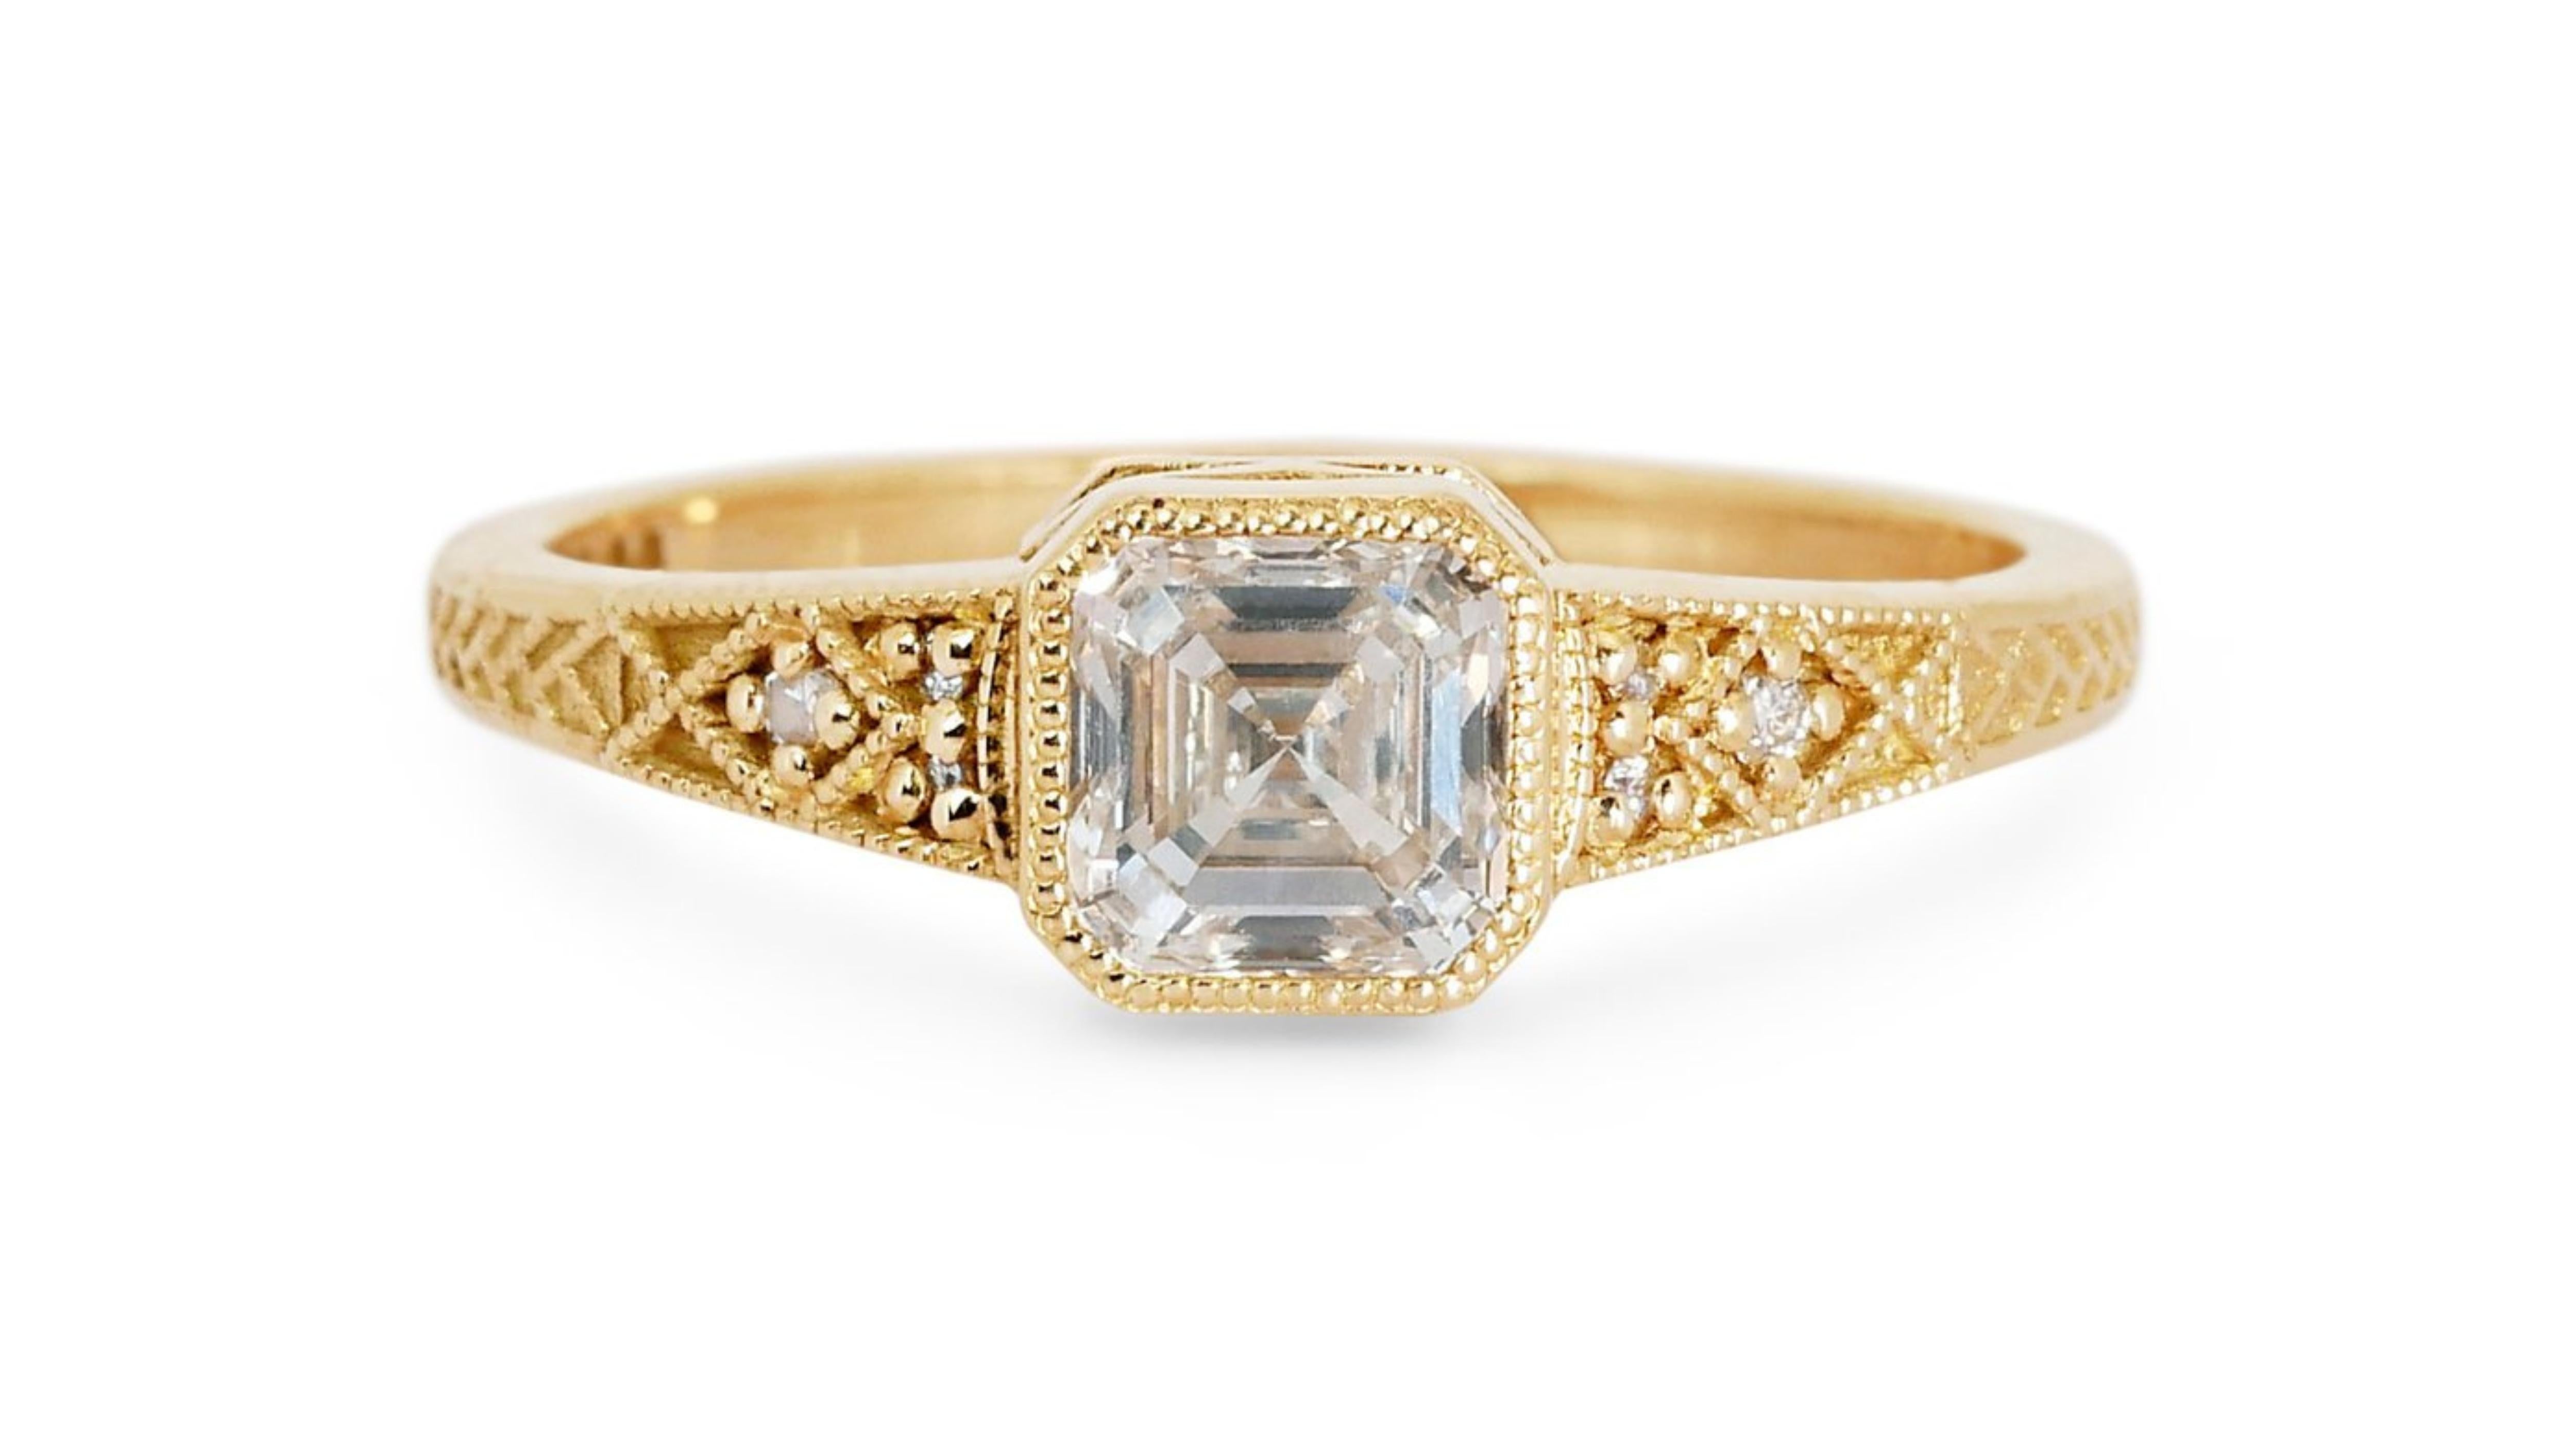 Magnificent 18k Yellow Gold Antique Style Ring w/ 0.83 ct Natural Diamonds IGI C For Sale 1